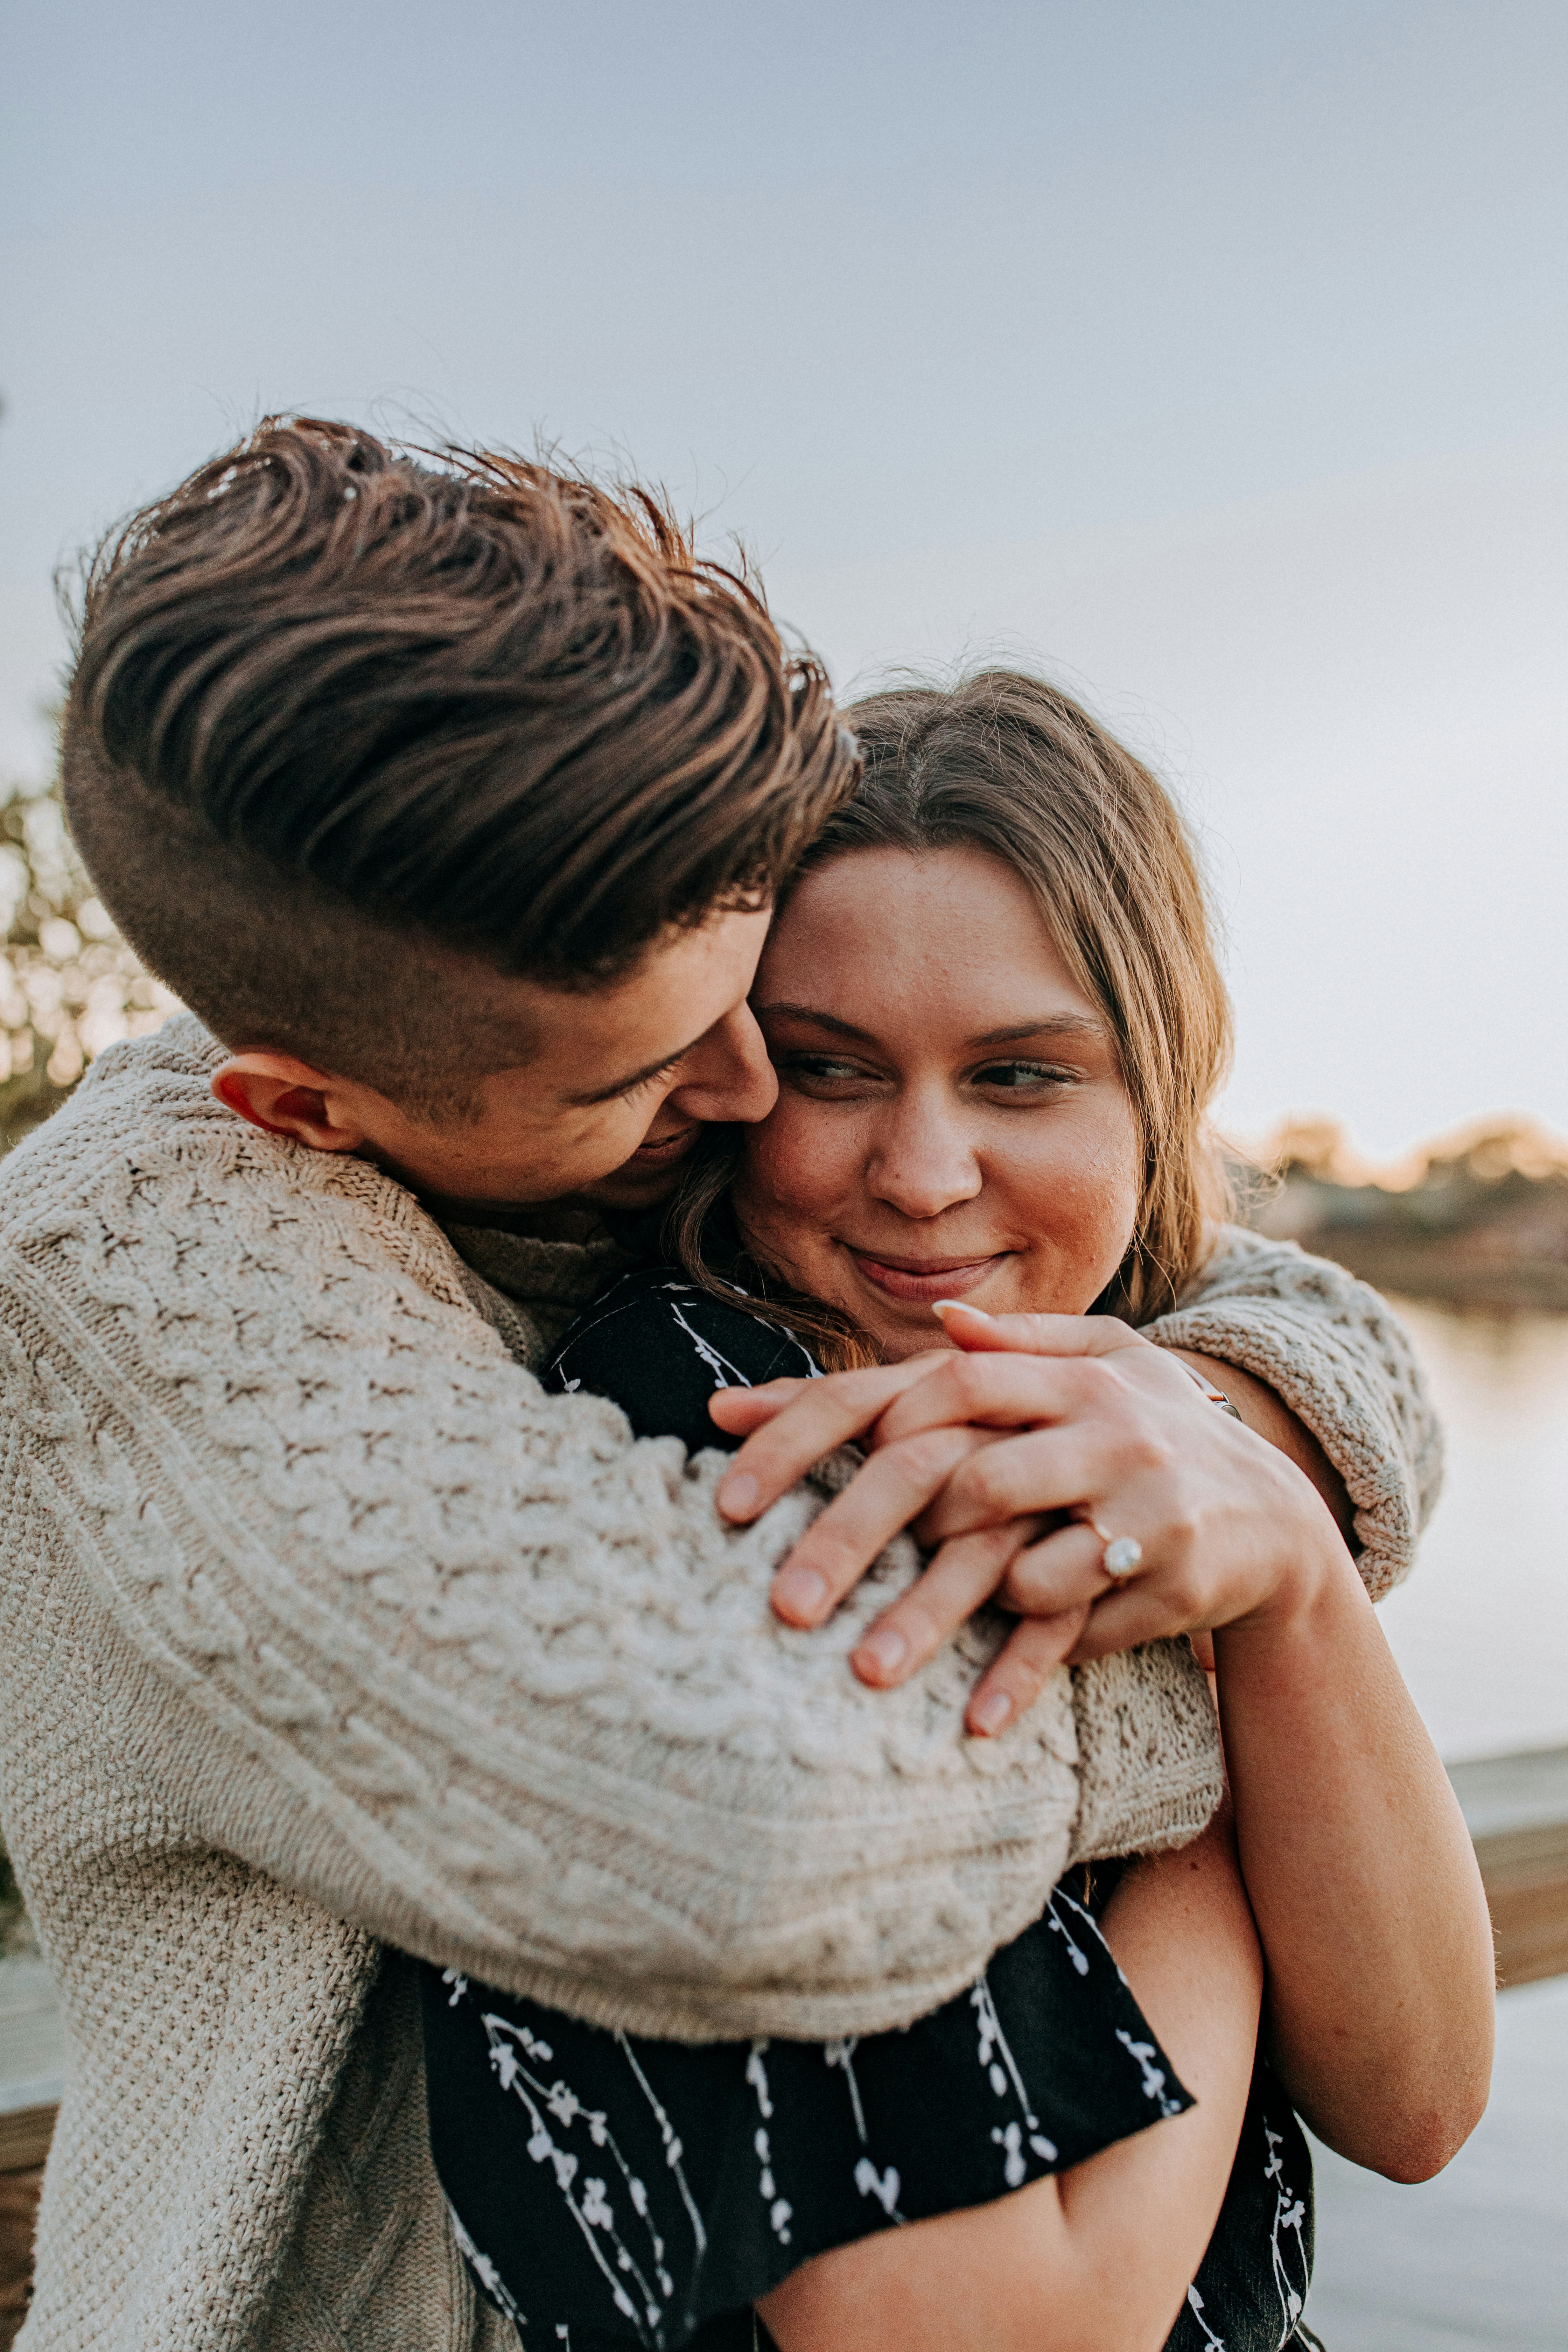 great photo recipe,how to photograph engagement, engaged, ring, hands, couple, in love, sweater, girl meets boy, proposal, florida, usa, marriage, young adults, candles, light, rose petals, happy, cute; man hugging woman by her back during day